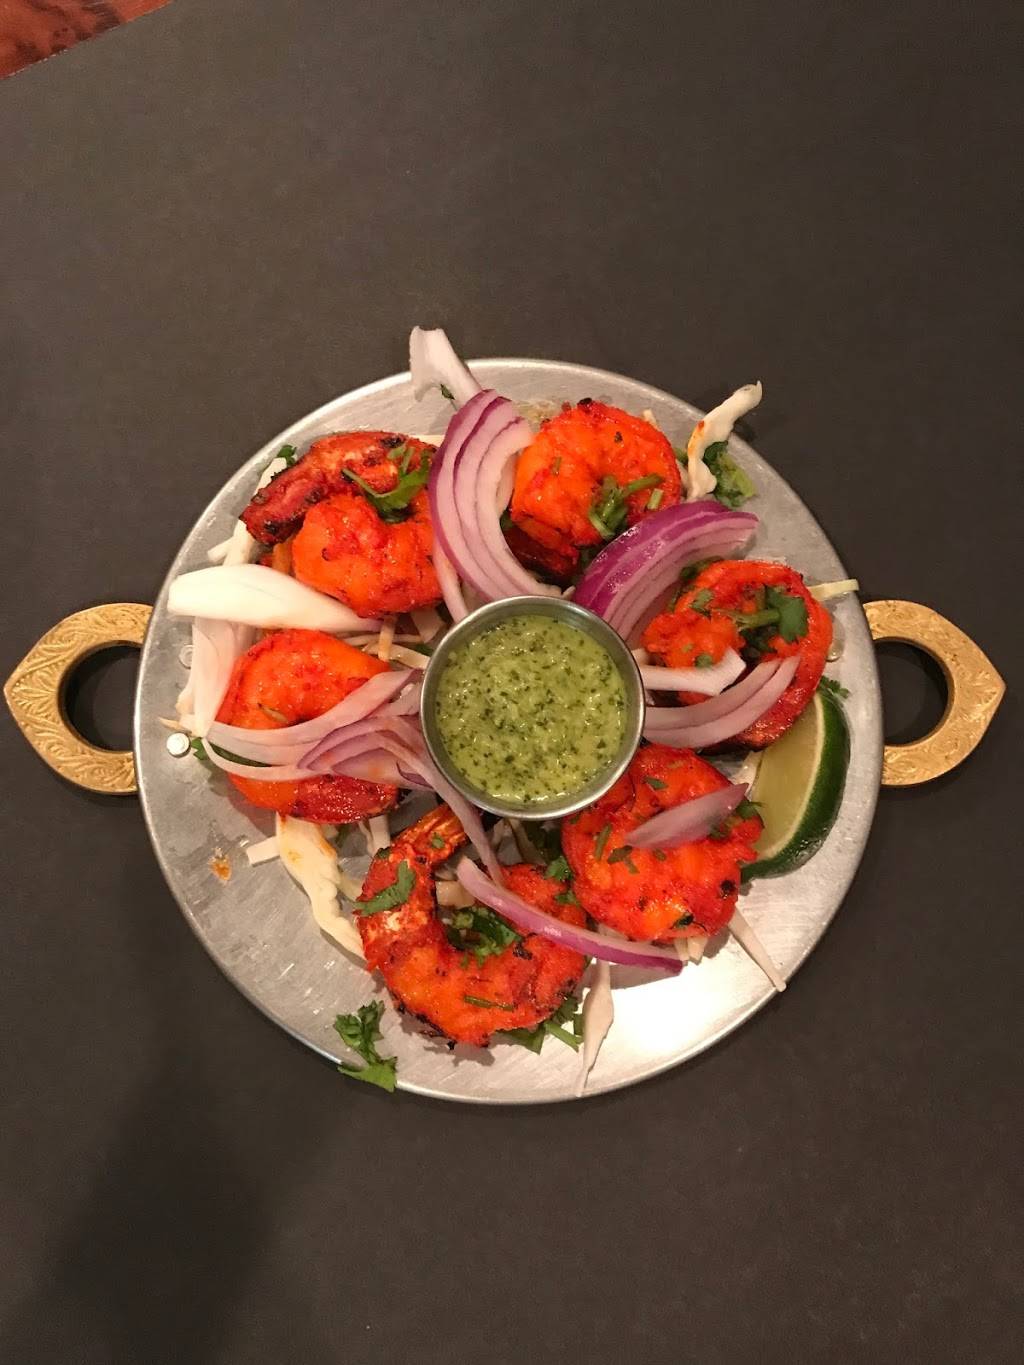 Silli Point Indian Fusion | restaurant | 498 Anderson Ave, Cliffside Park, NJ 07010, USA | 2019410271 OR +1 201-941-0271